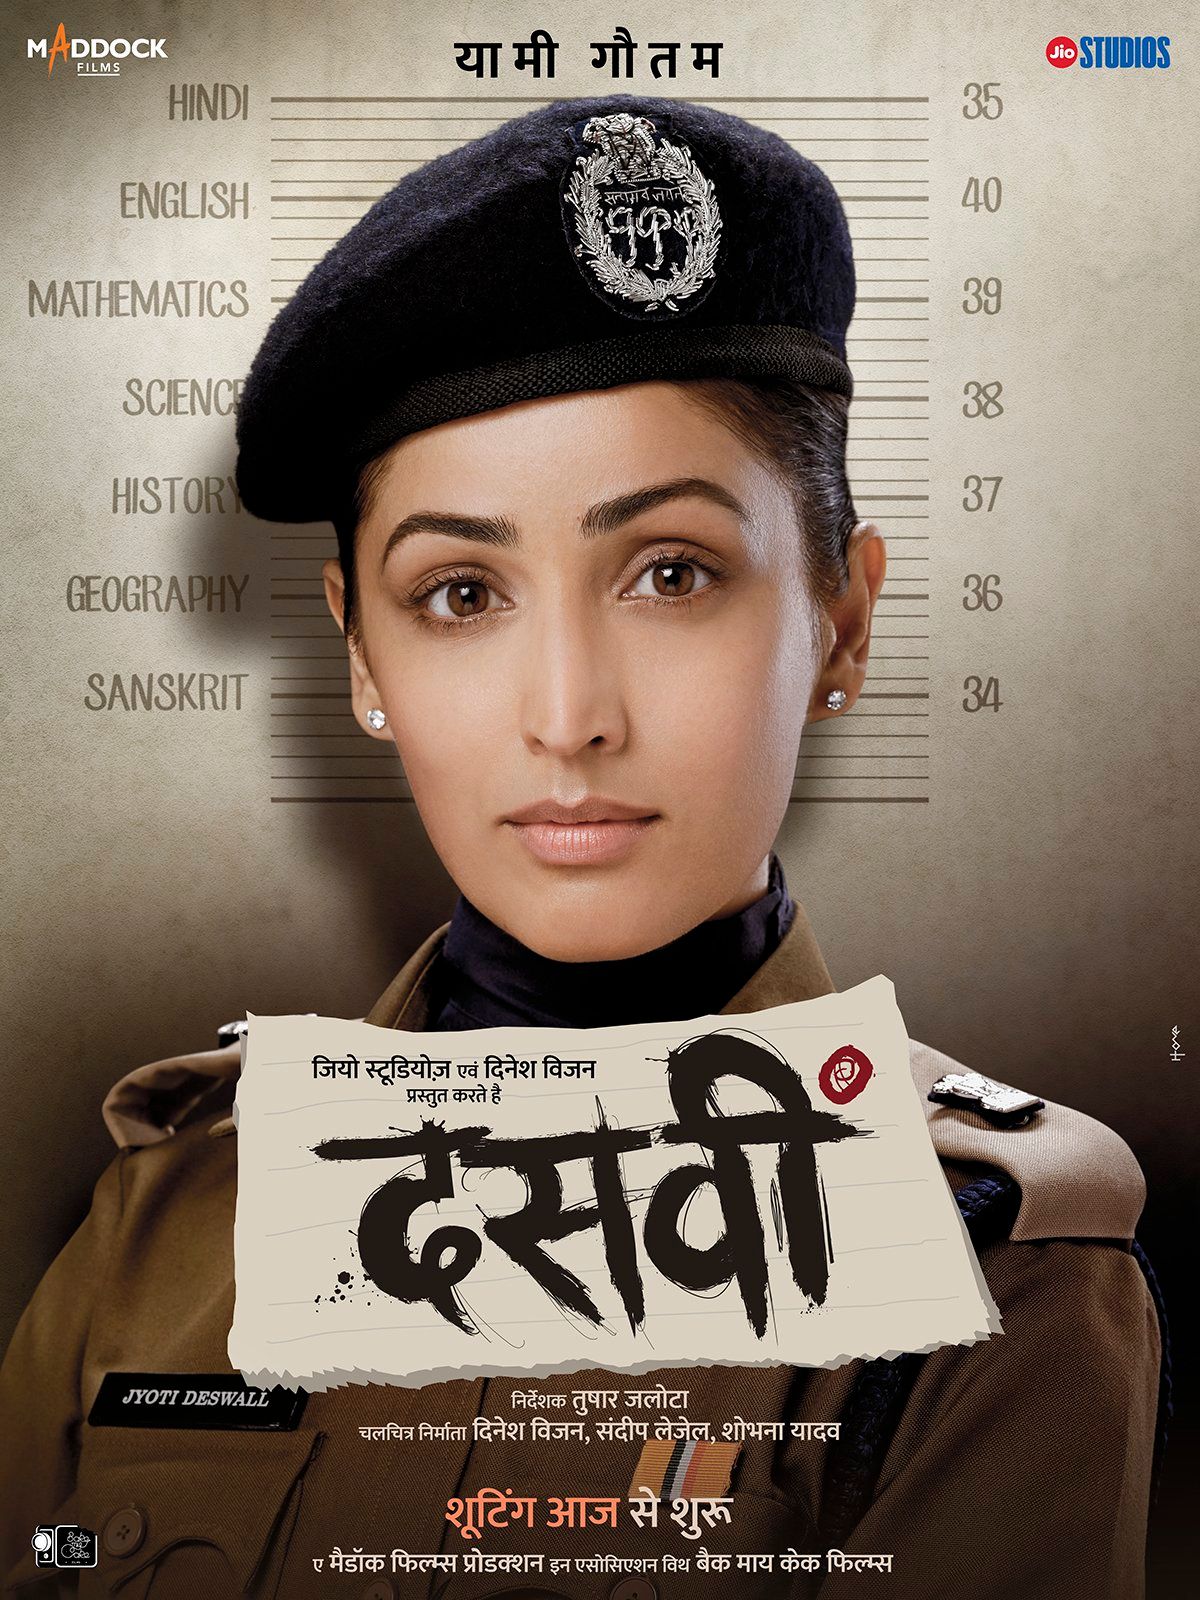 Bollywood News Today: Another Poster Of Movie Dasvi Out, But This Time featuring Yami Gautam  